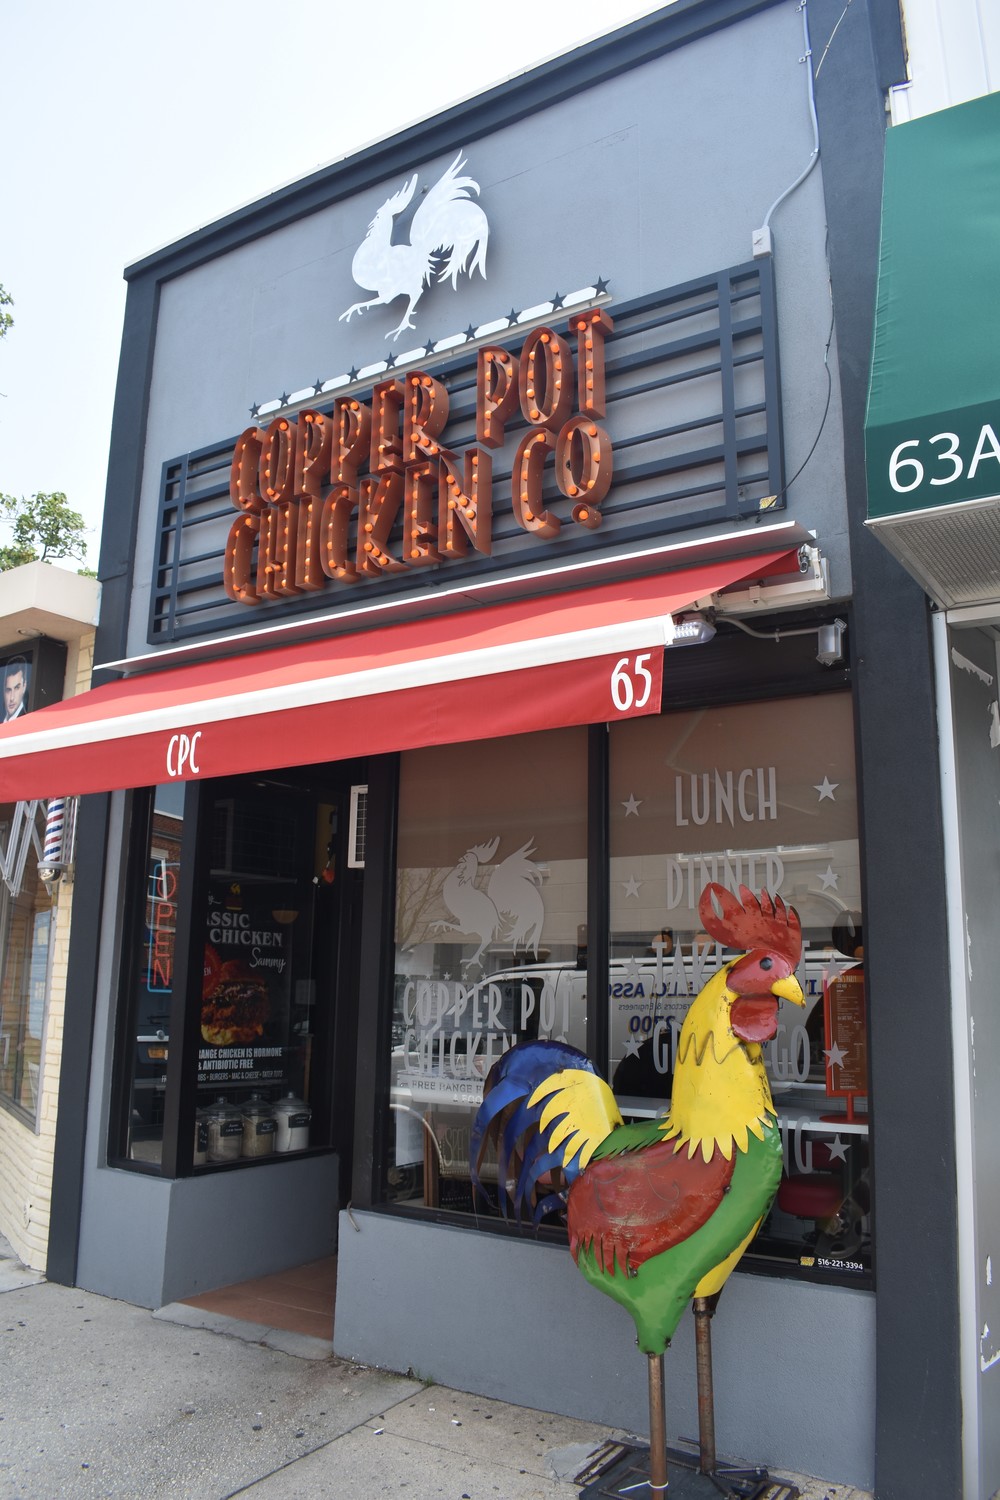 Copper Pot Chicken Co., which opened last year, will soon have some new menu items after a change in ownership.